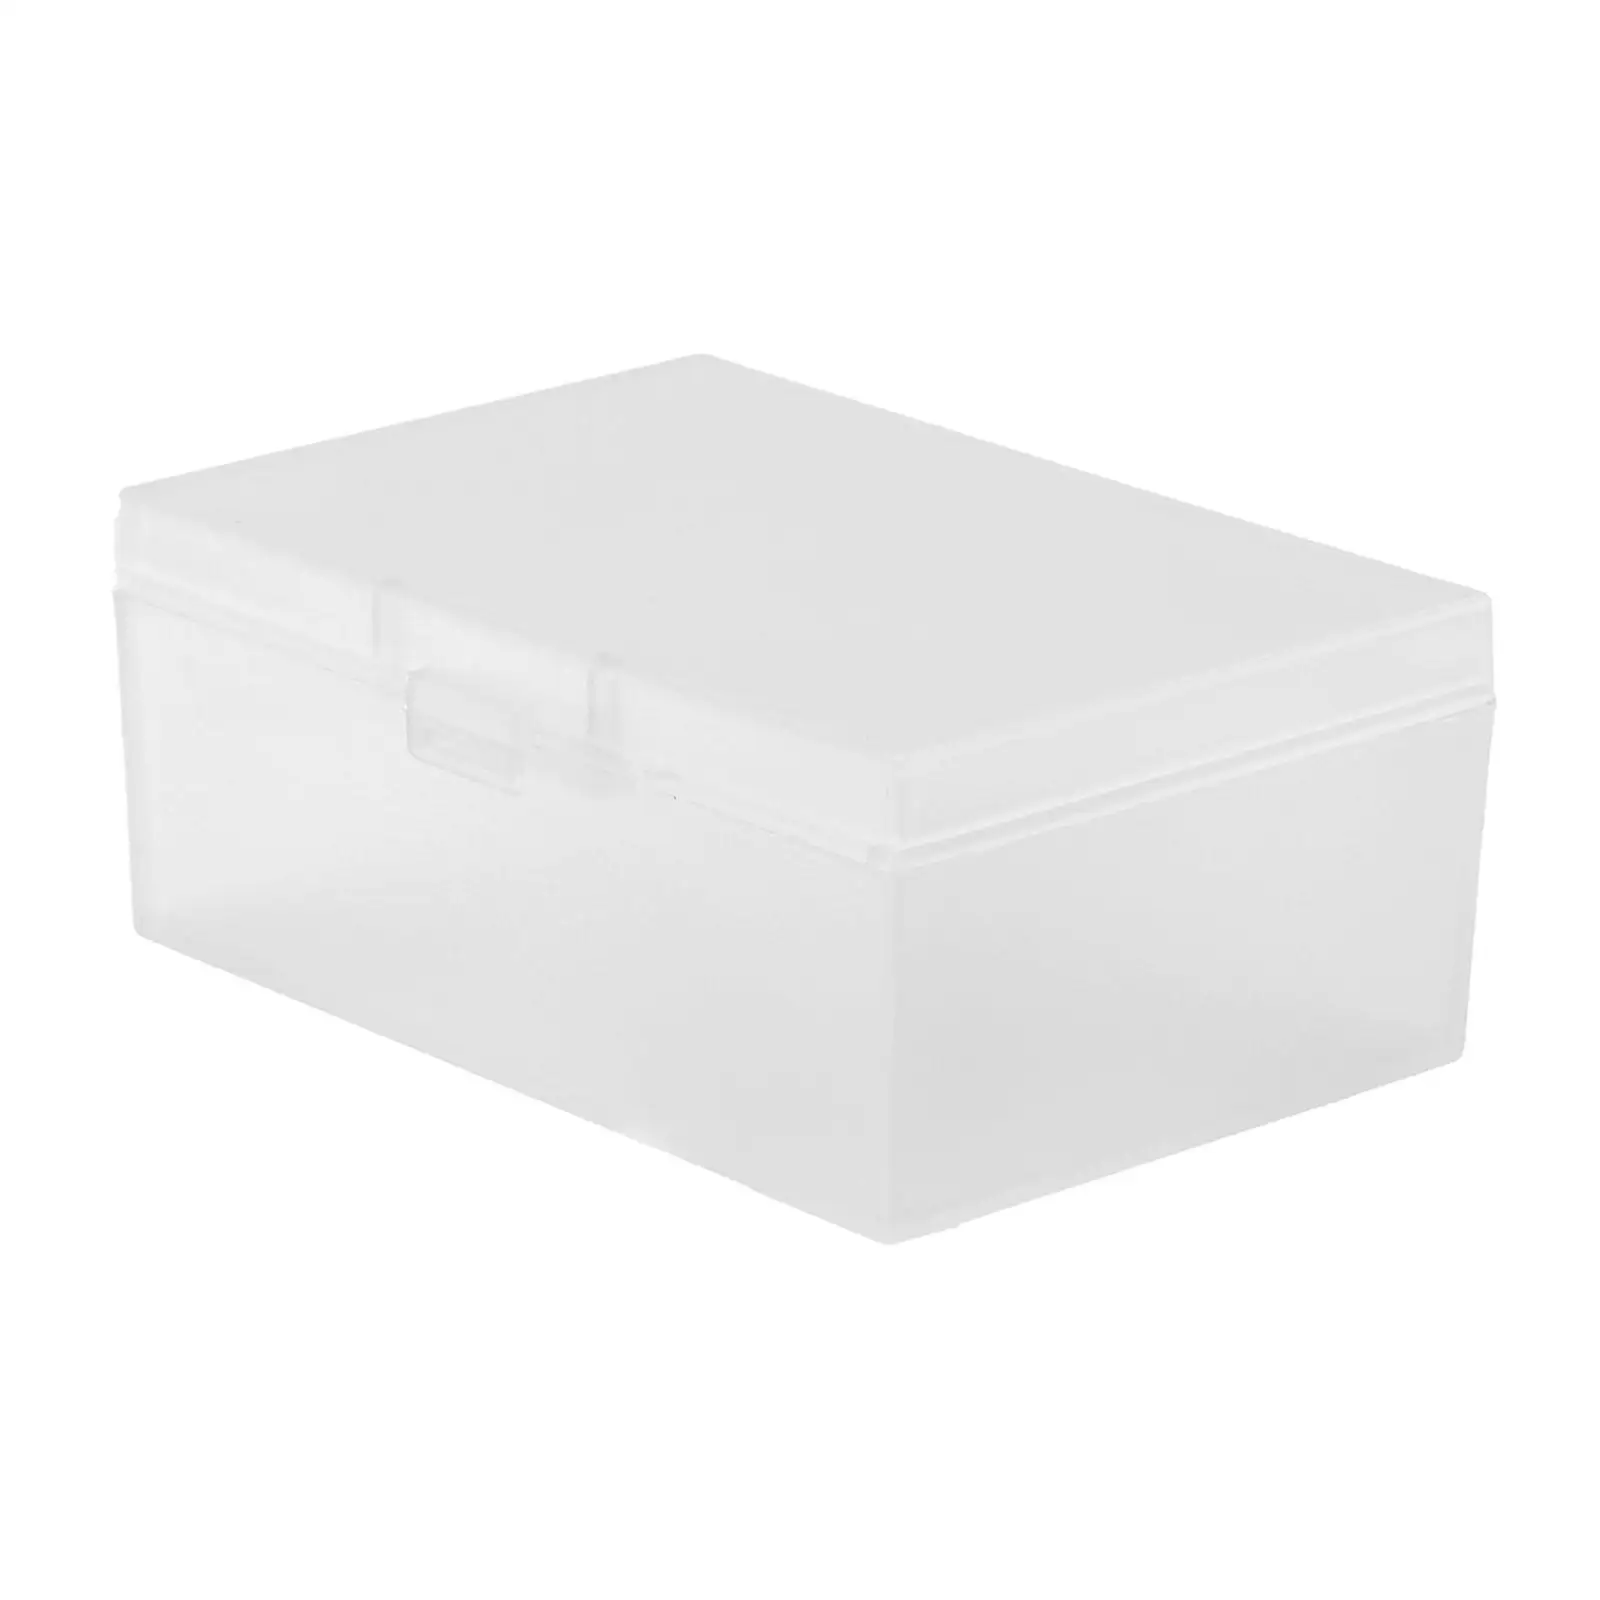 

Card Storage Box Large Capacity Protect Collectible Card Collector Box for Photos Crafts Holiday Baseball Cards Sports Card